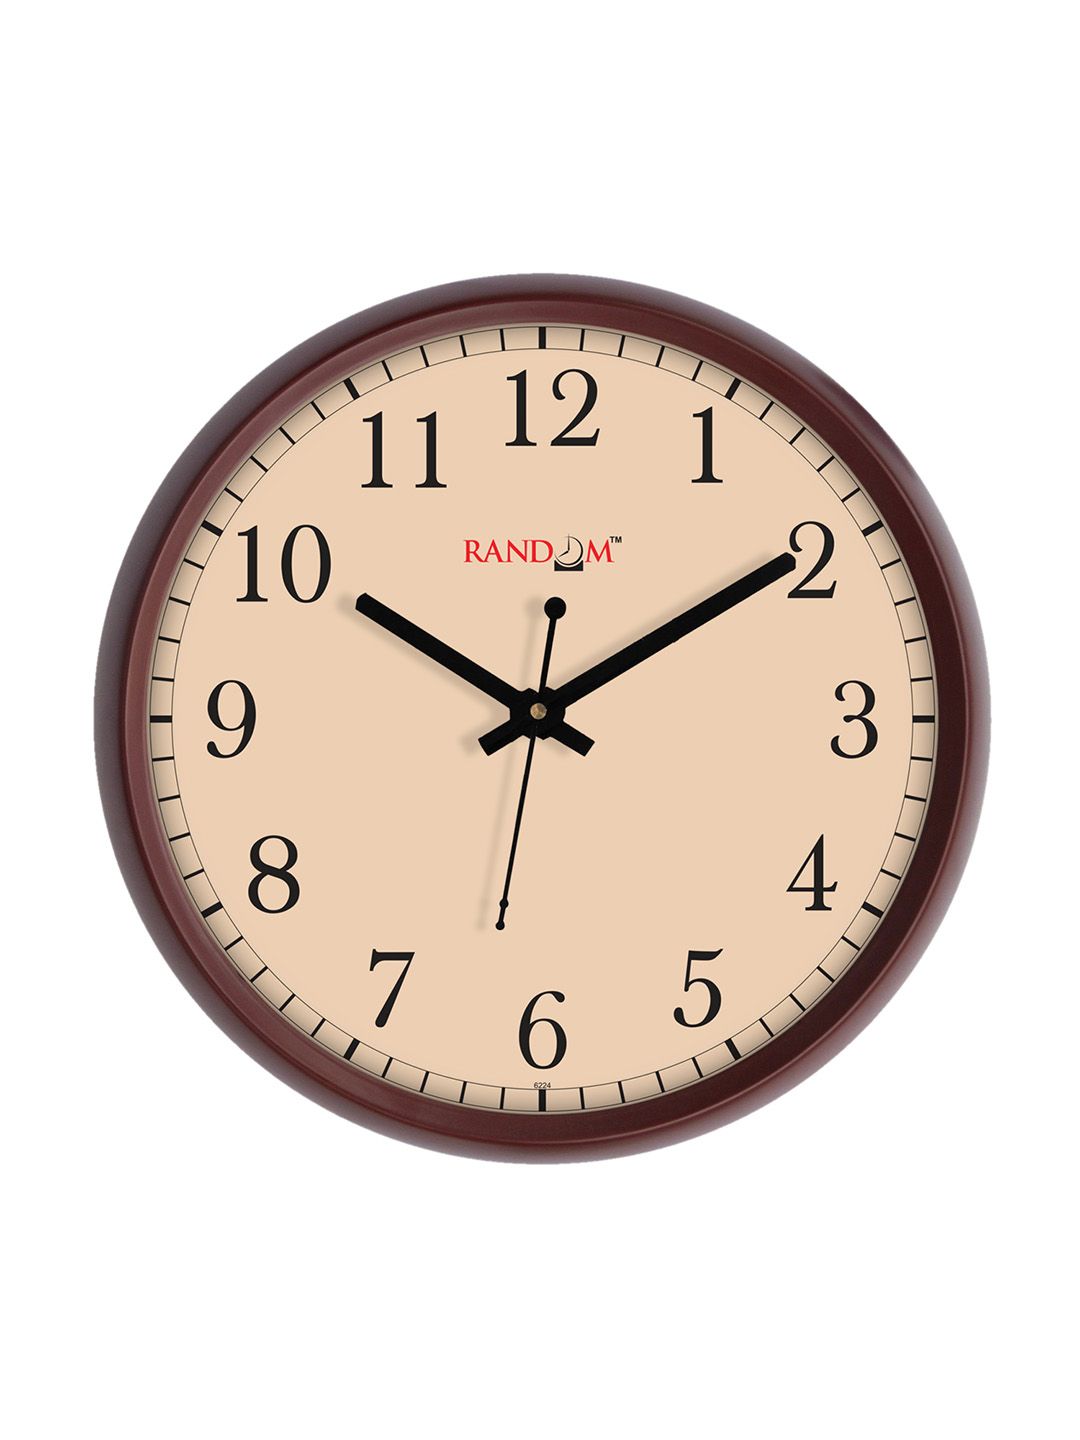 RANDOM Peach-Coloured Round Solid Analogue 30 cm Wall Clock Price in India